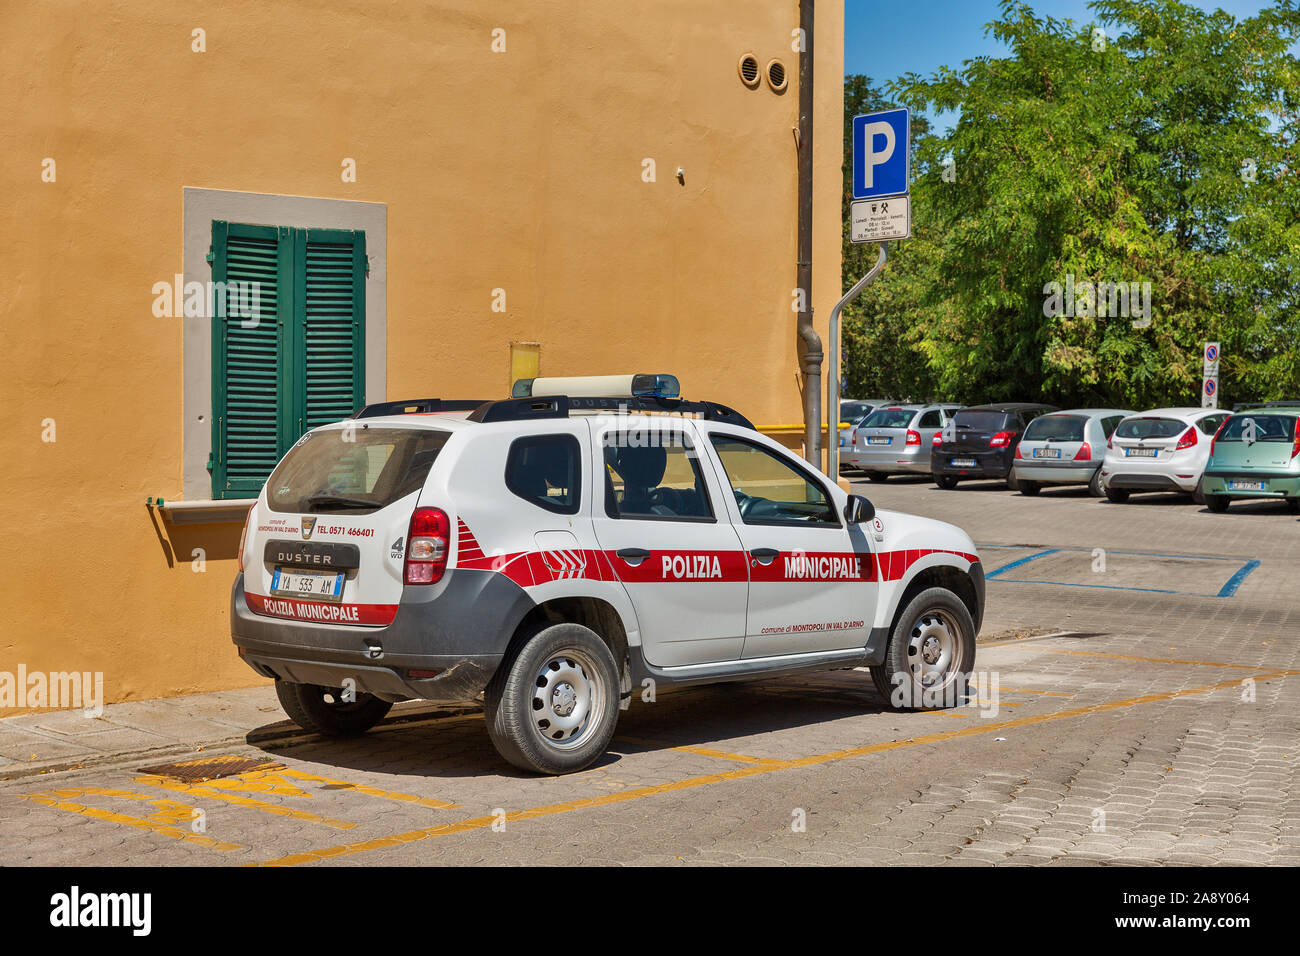 MONTOPOLI IN VAL D'ARNO, ITALY - JULY 24, 2019: Municipal Police car Renault Duster parked on the street. It is a municipality in the Province of Pisa Stock Photo